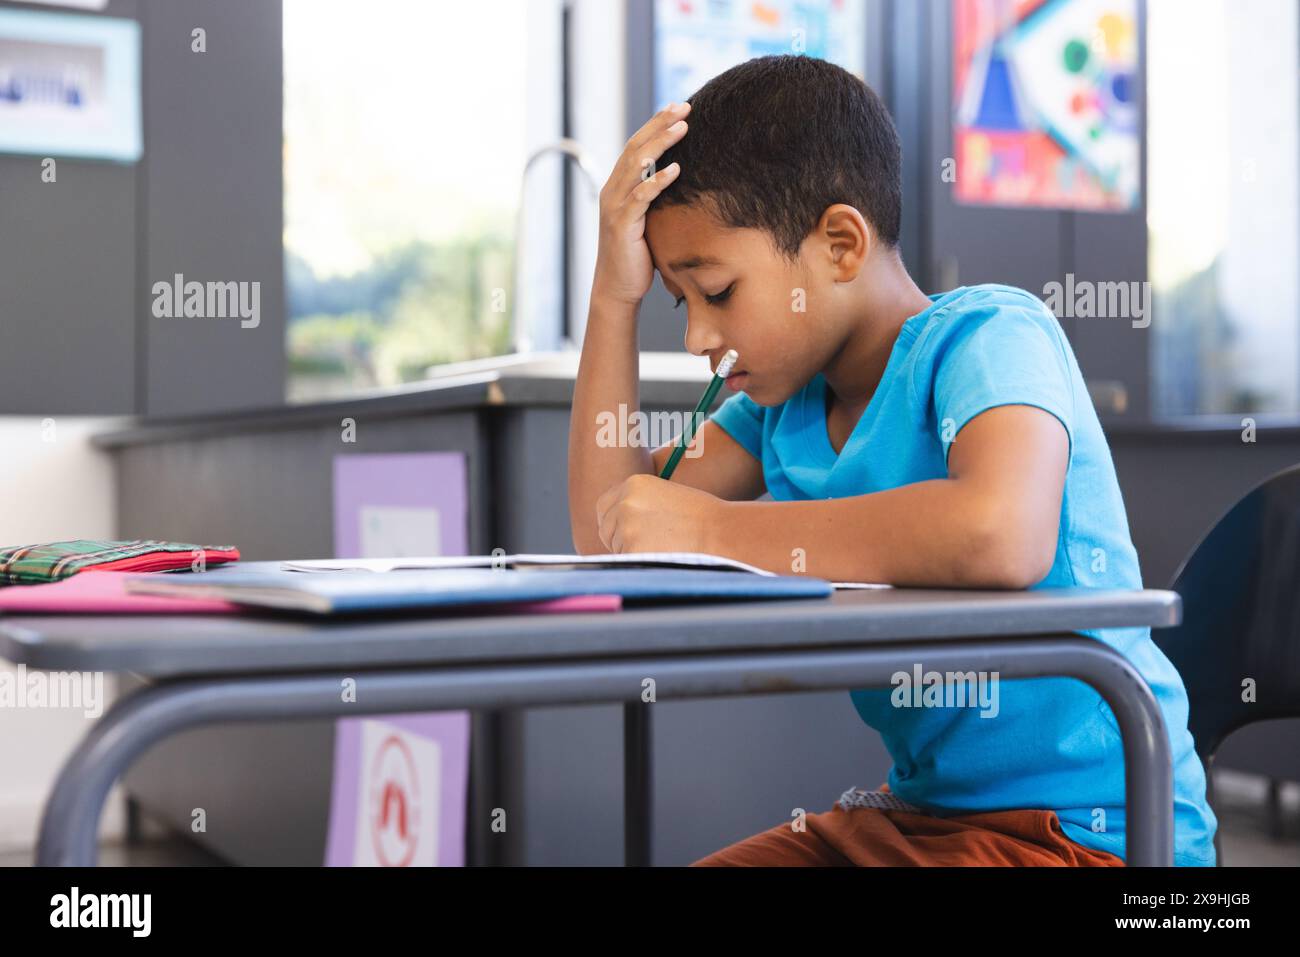 Biracial boy focused on schoolwork in the classroom at school Stock Photo